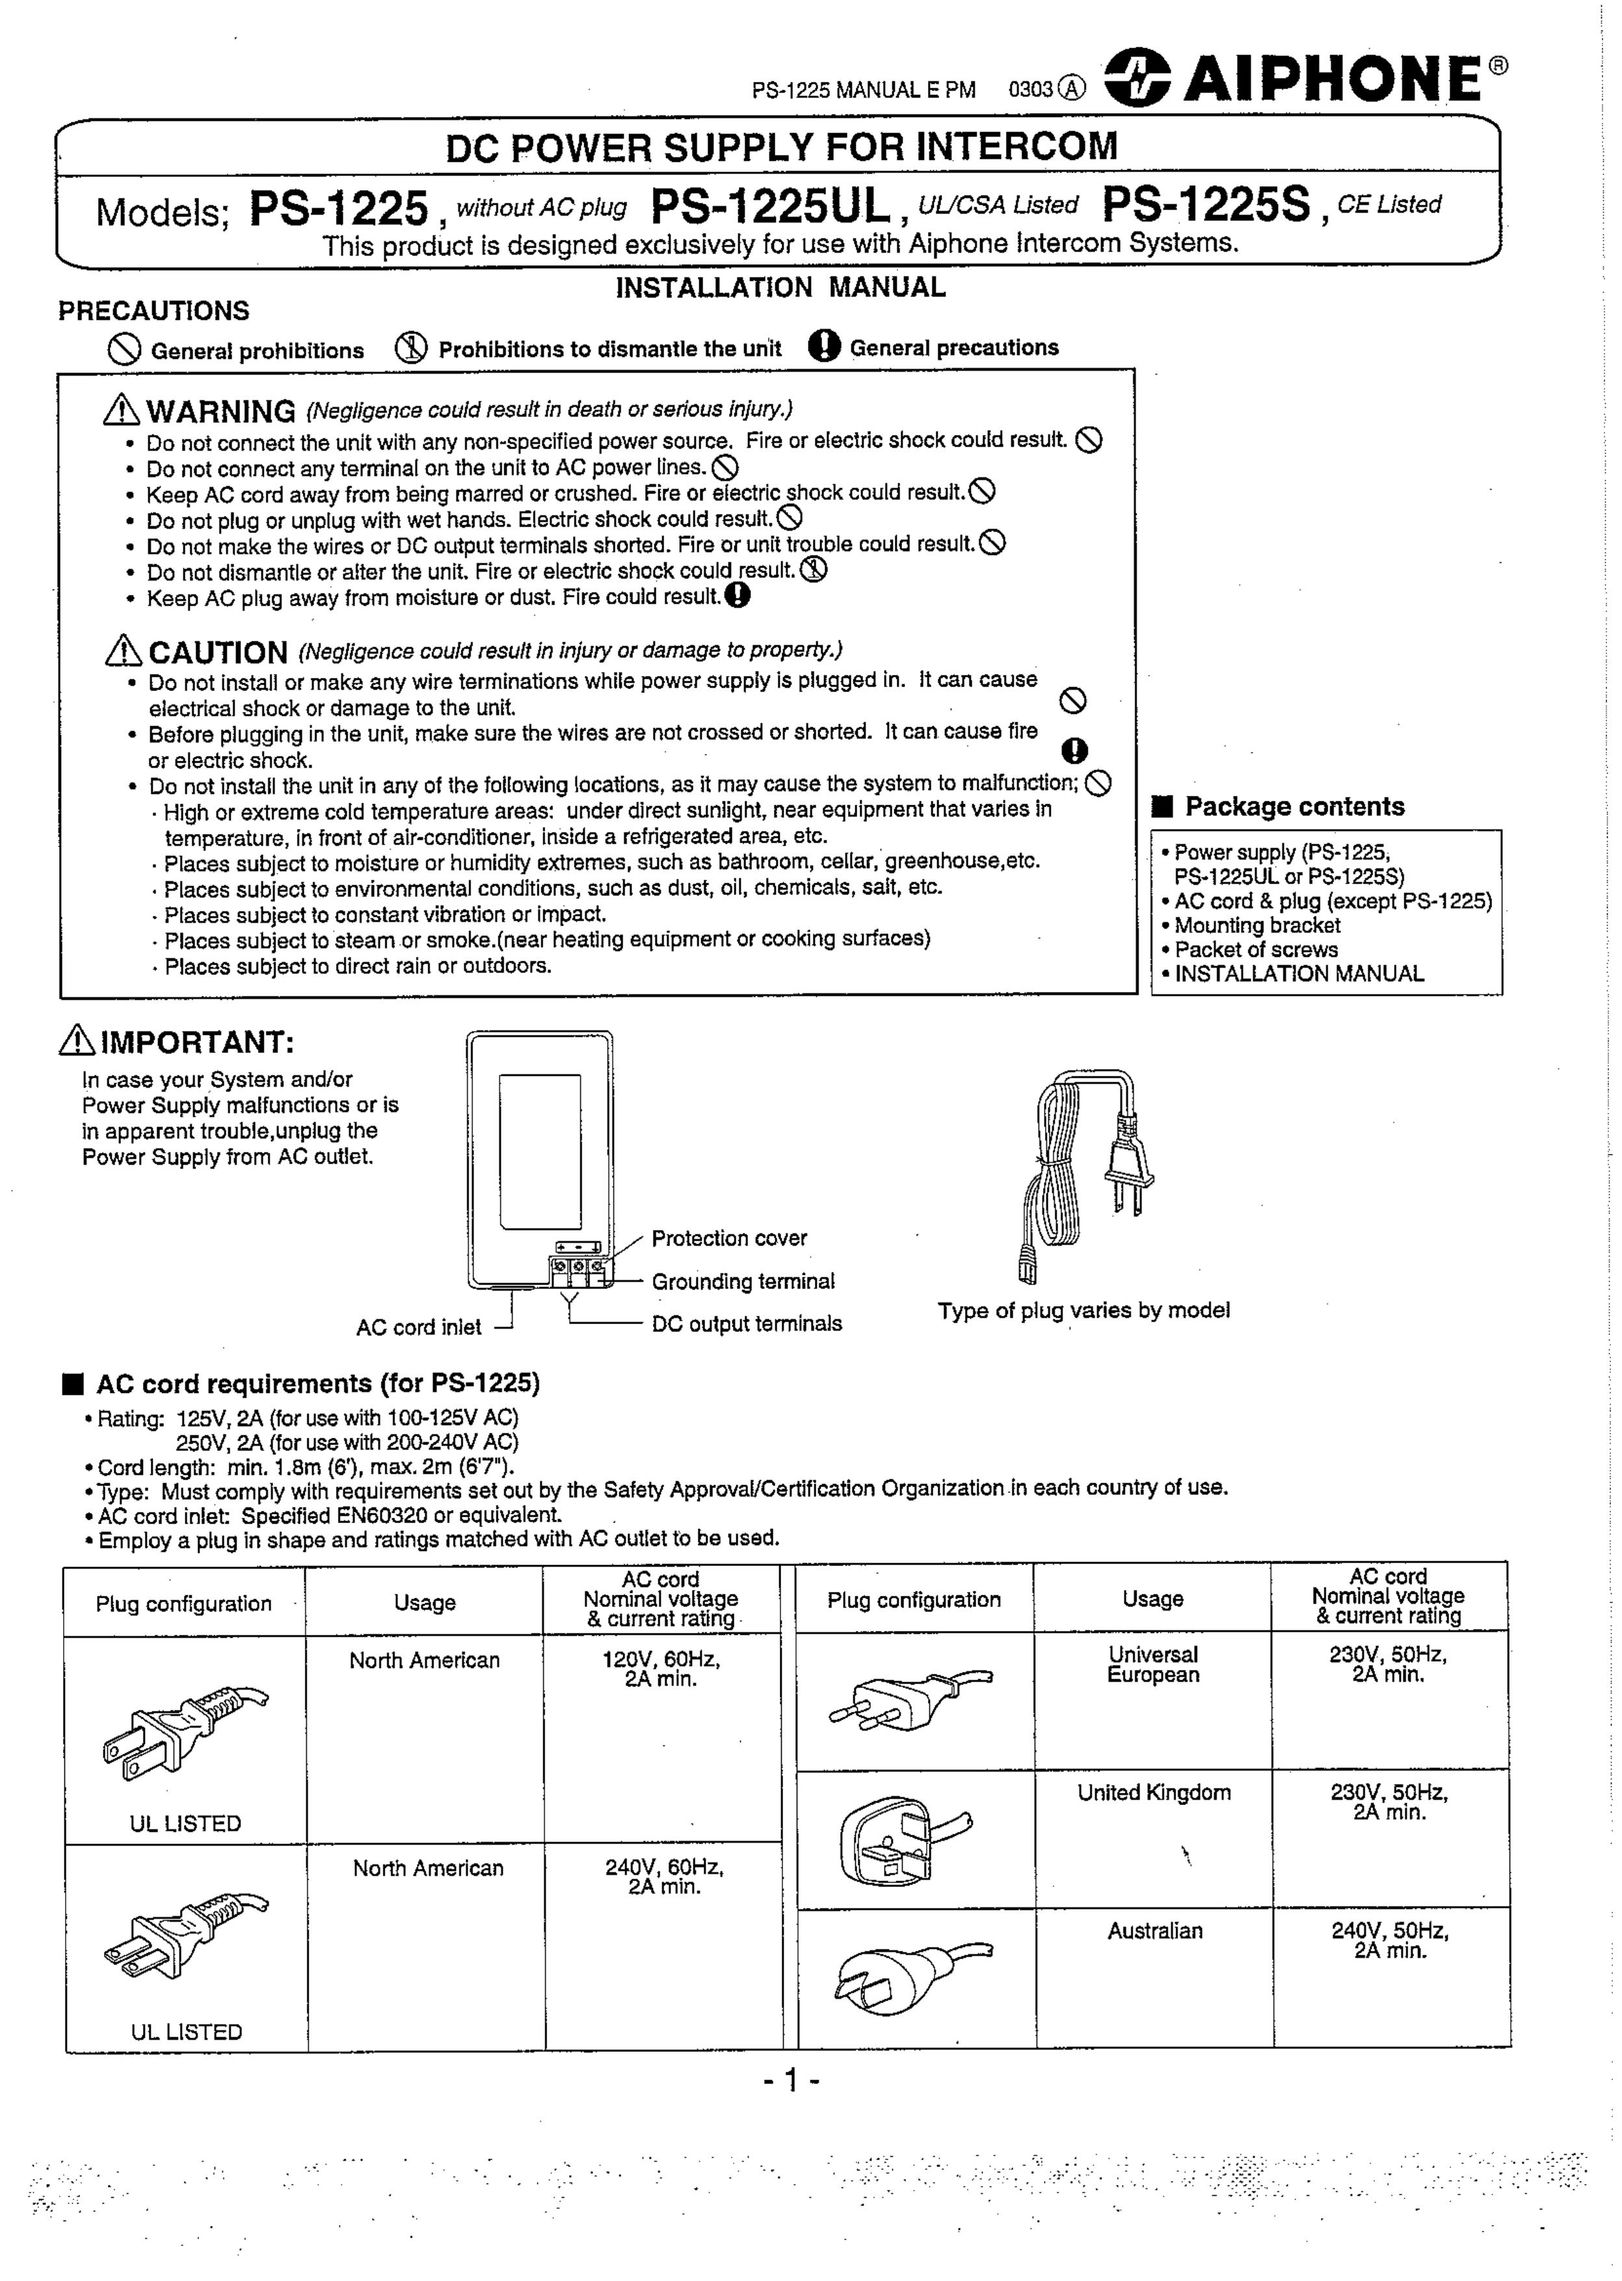 Aiphone PS-1225S Power Supply User Manual